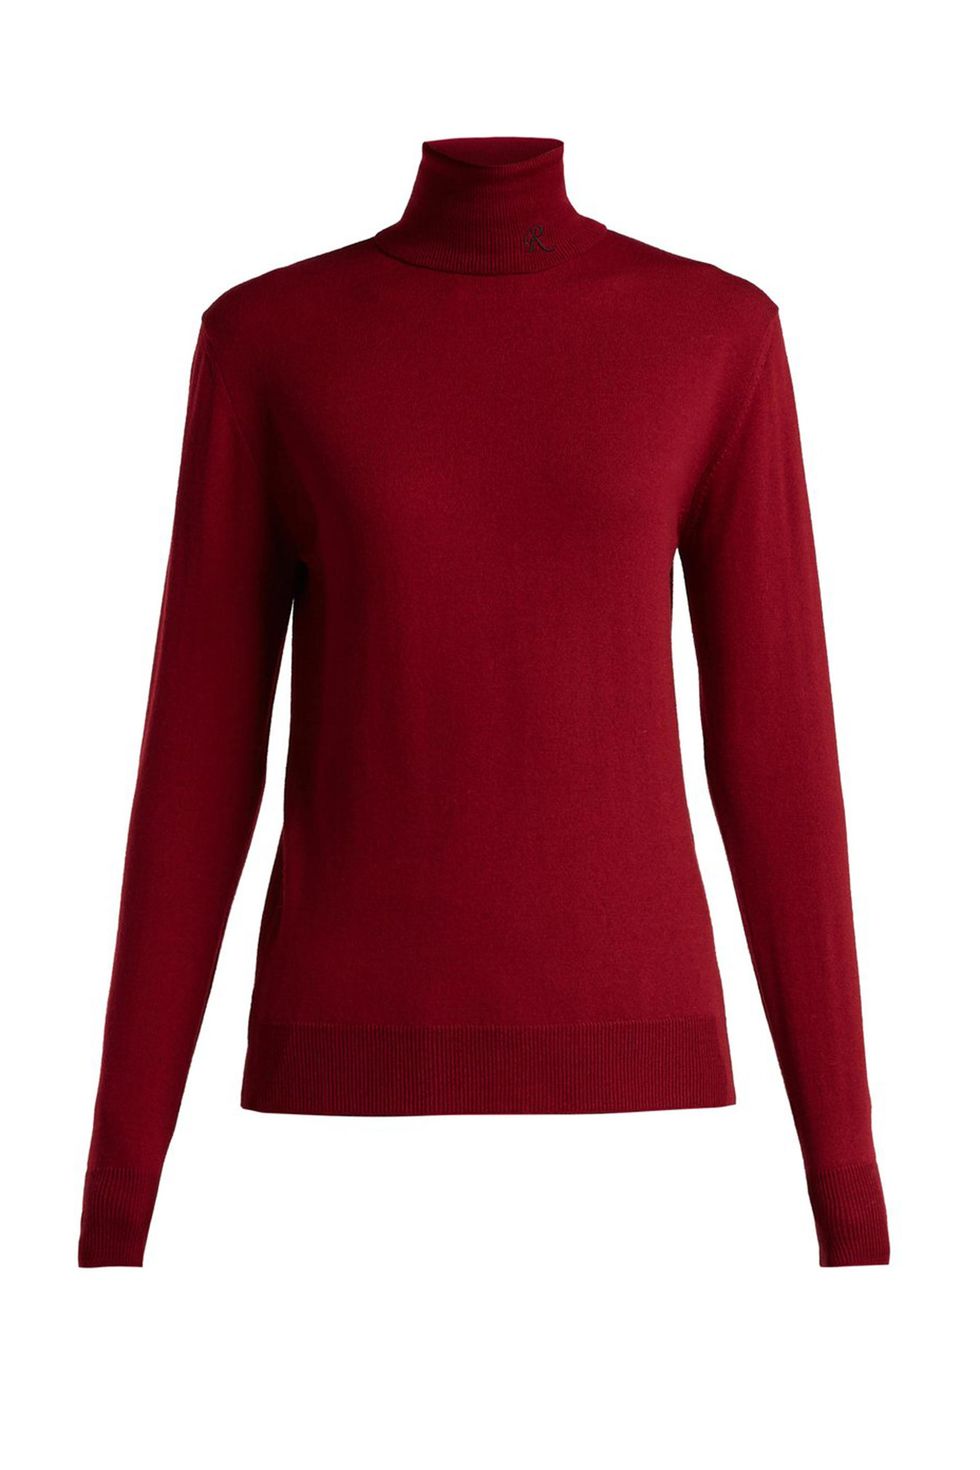 Clothing, Sleeve, Red, Neck, Outerwear, Long-sleeved t-shirt, Maroon, Shoulder, Sweater, Collar, 